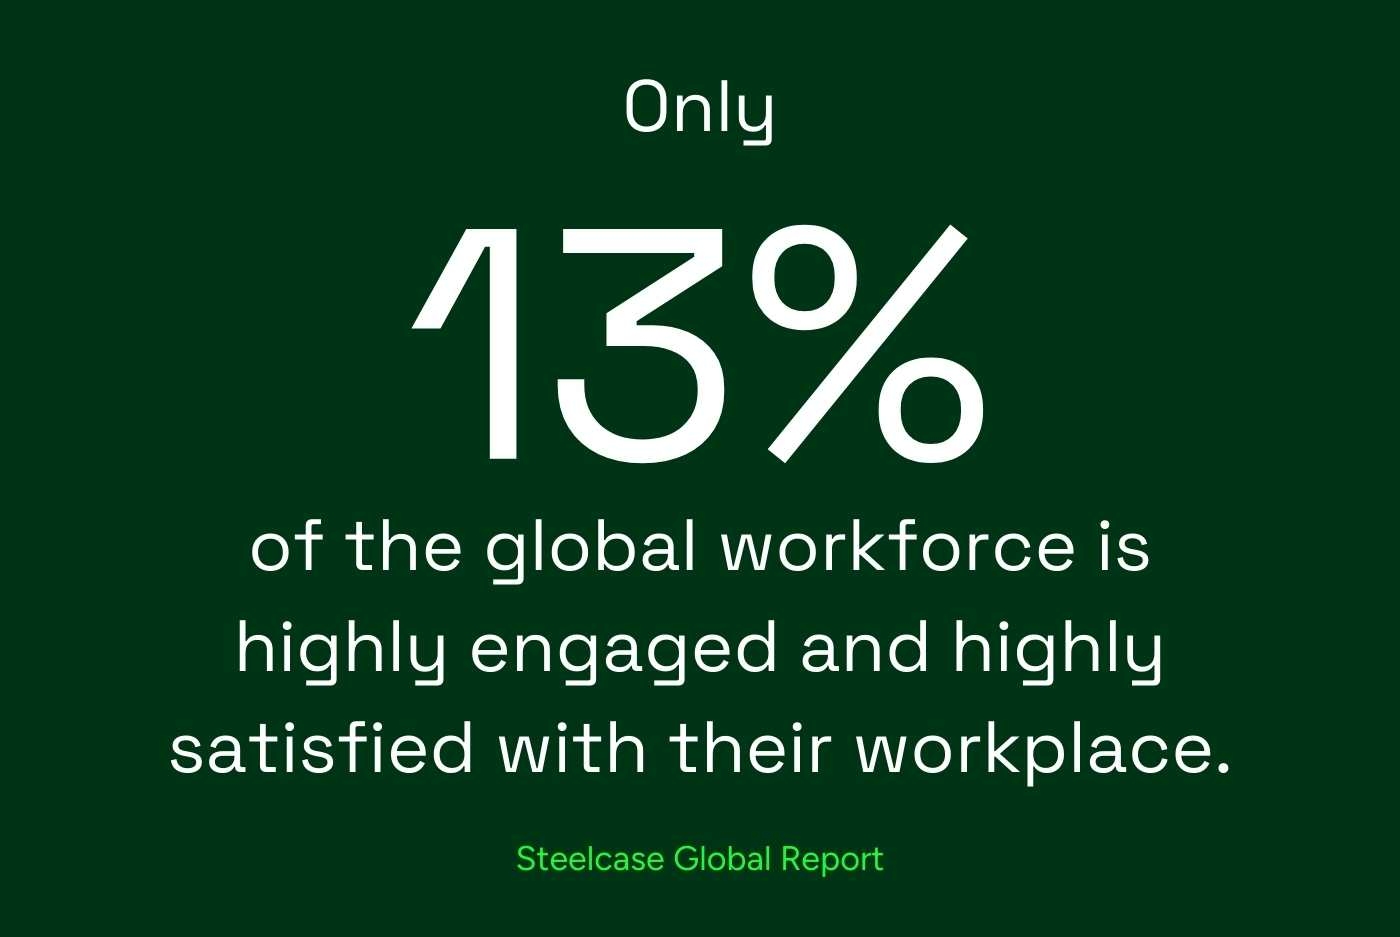 Steelcase Global research statistic showing only 13% are engaged.